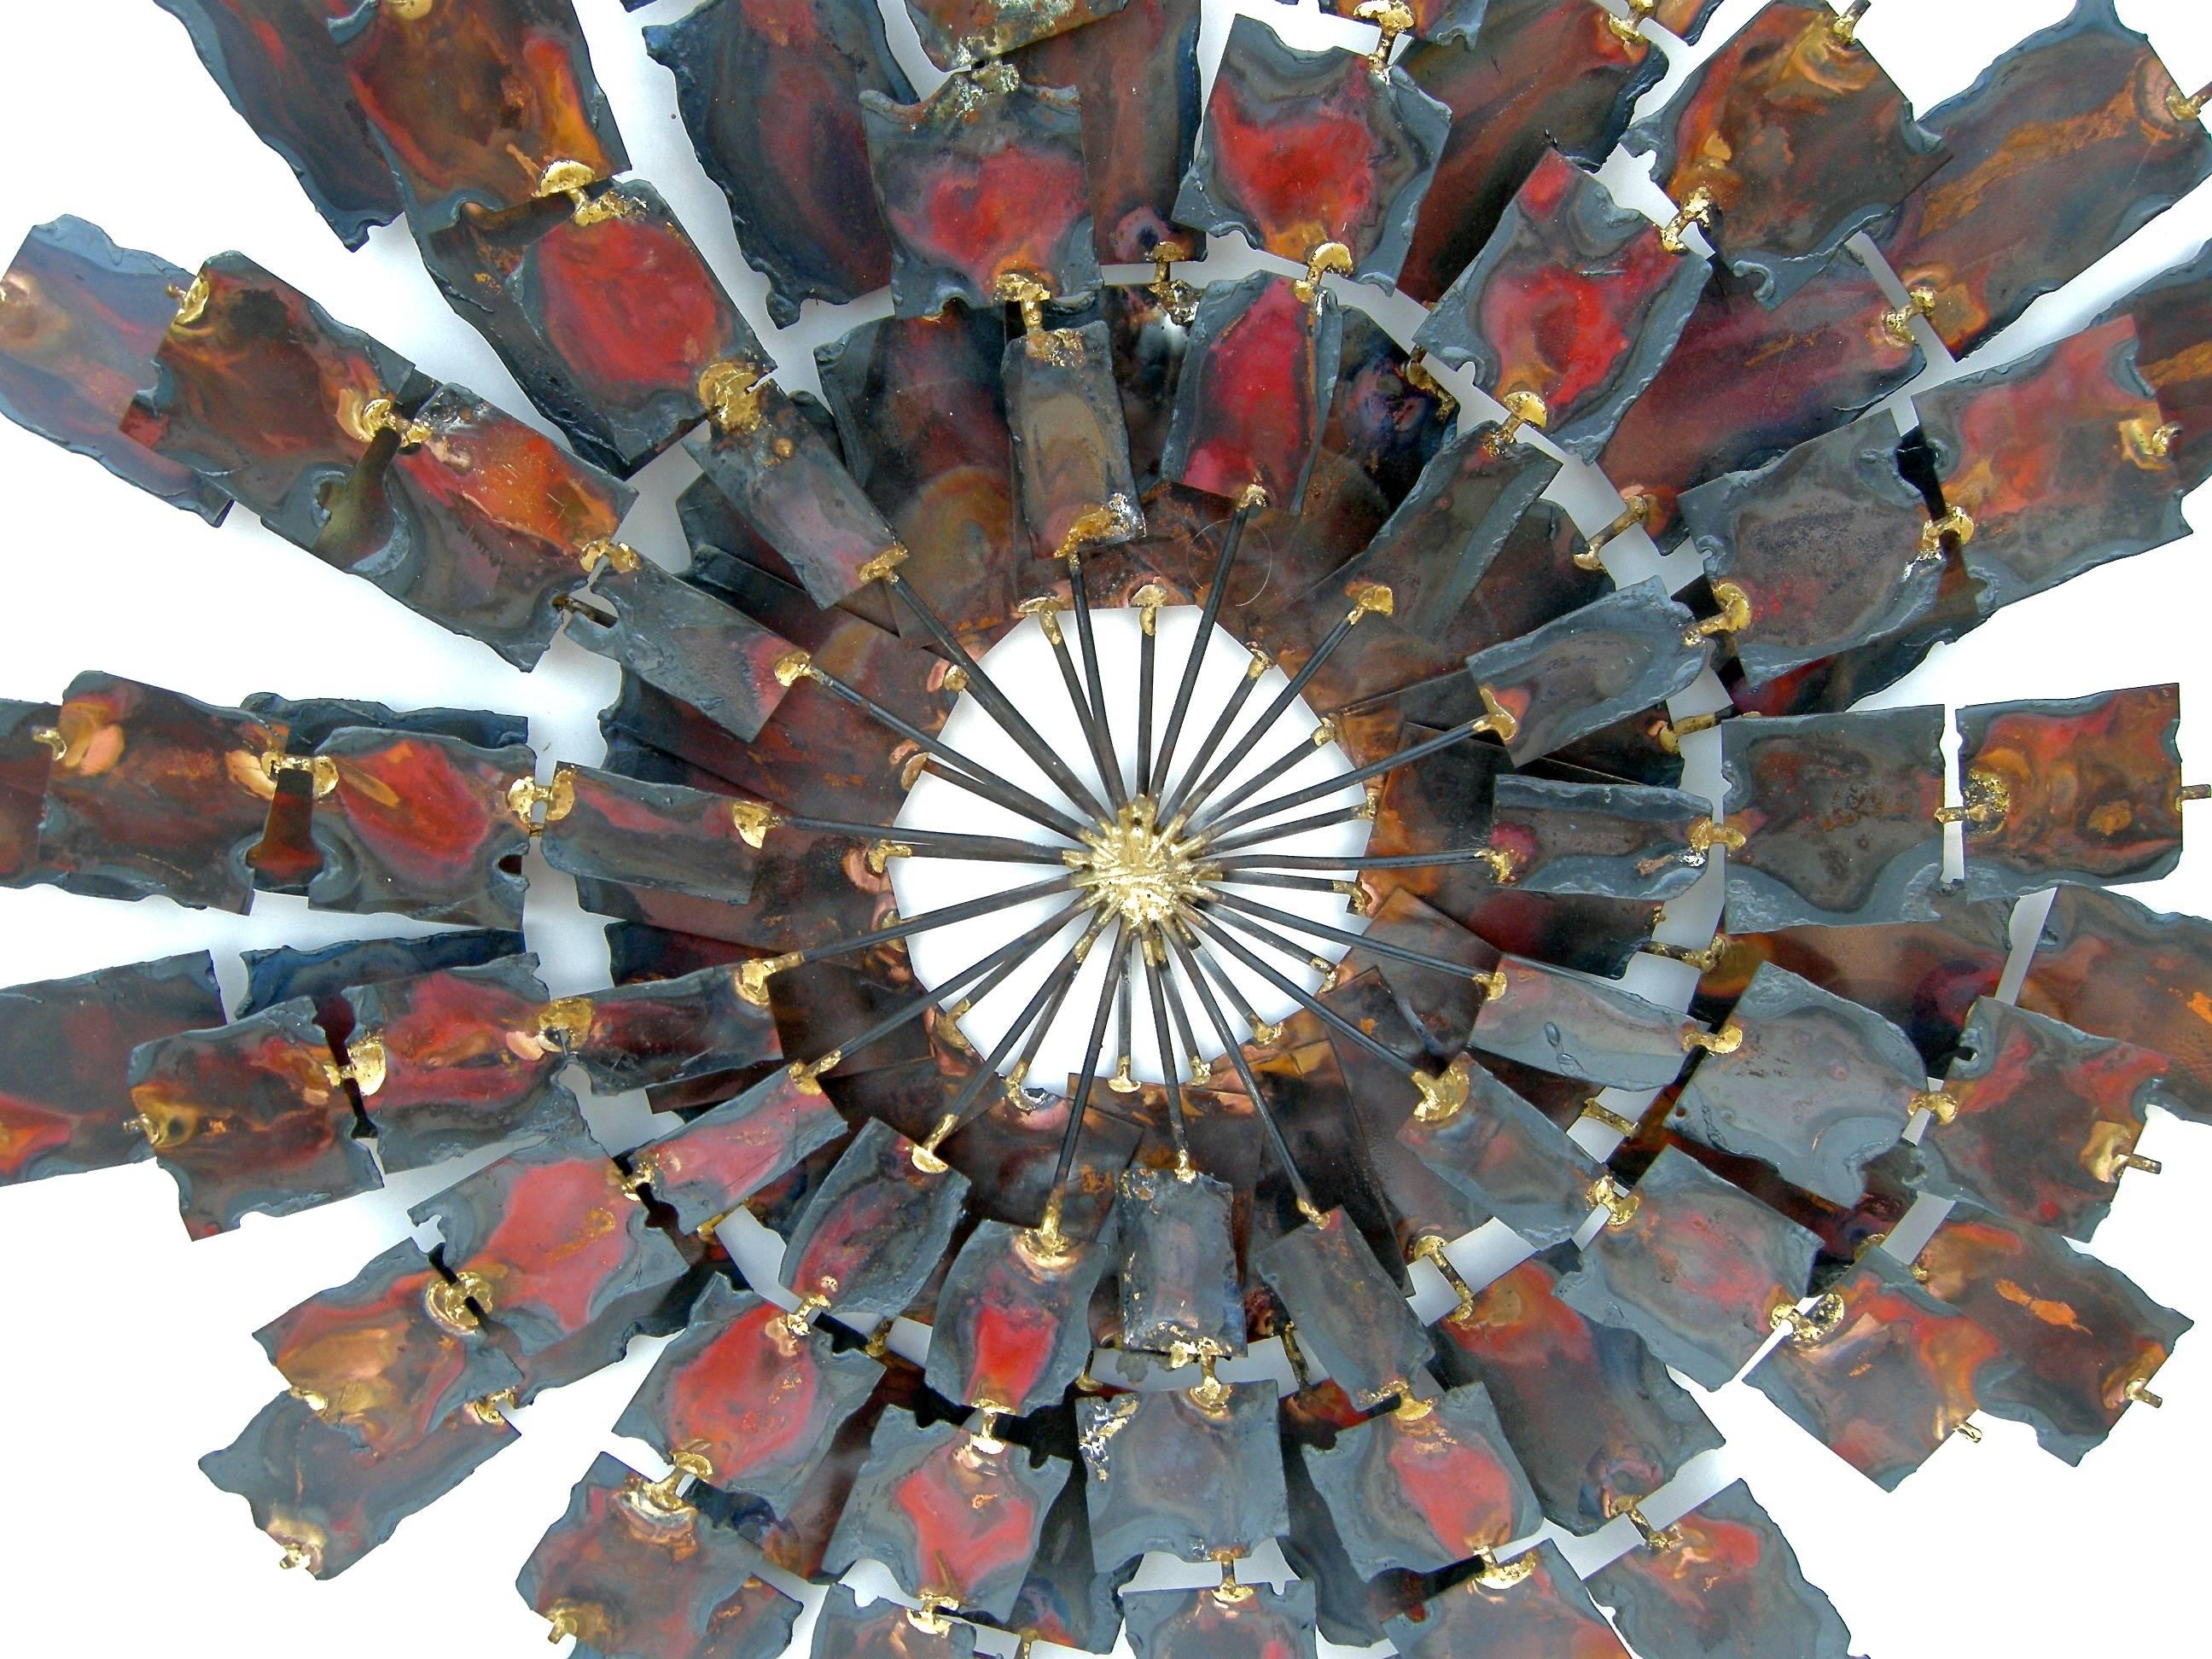 A striking, vintage, mixed metal starburst wall sculpture. Graphic, hand-cut, radiating metallic arms in varying shades of color and patina. Attributed to designer William Bowie.